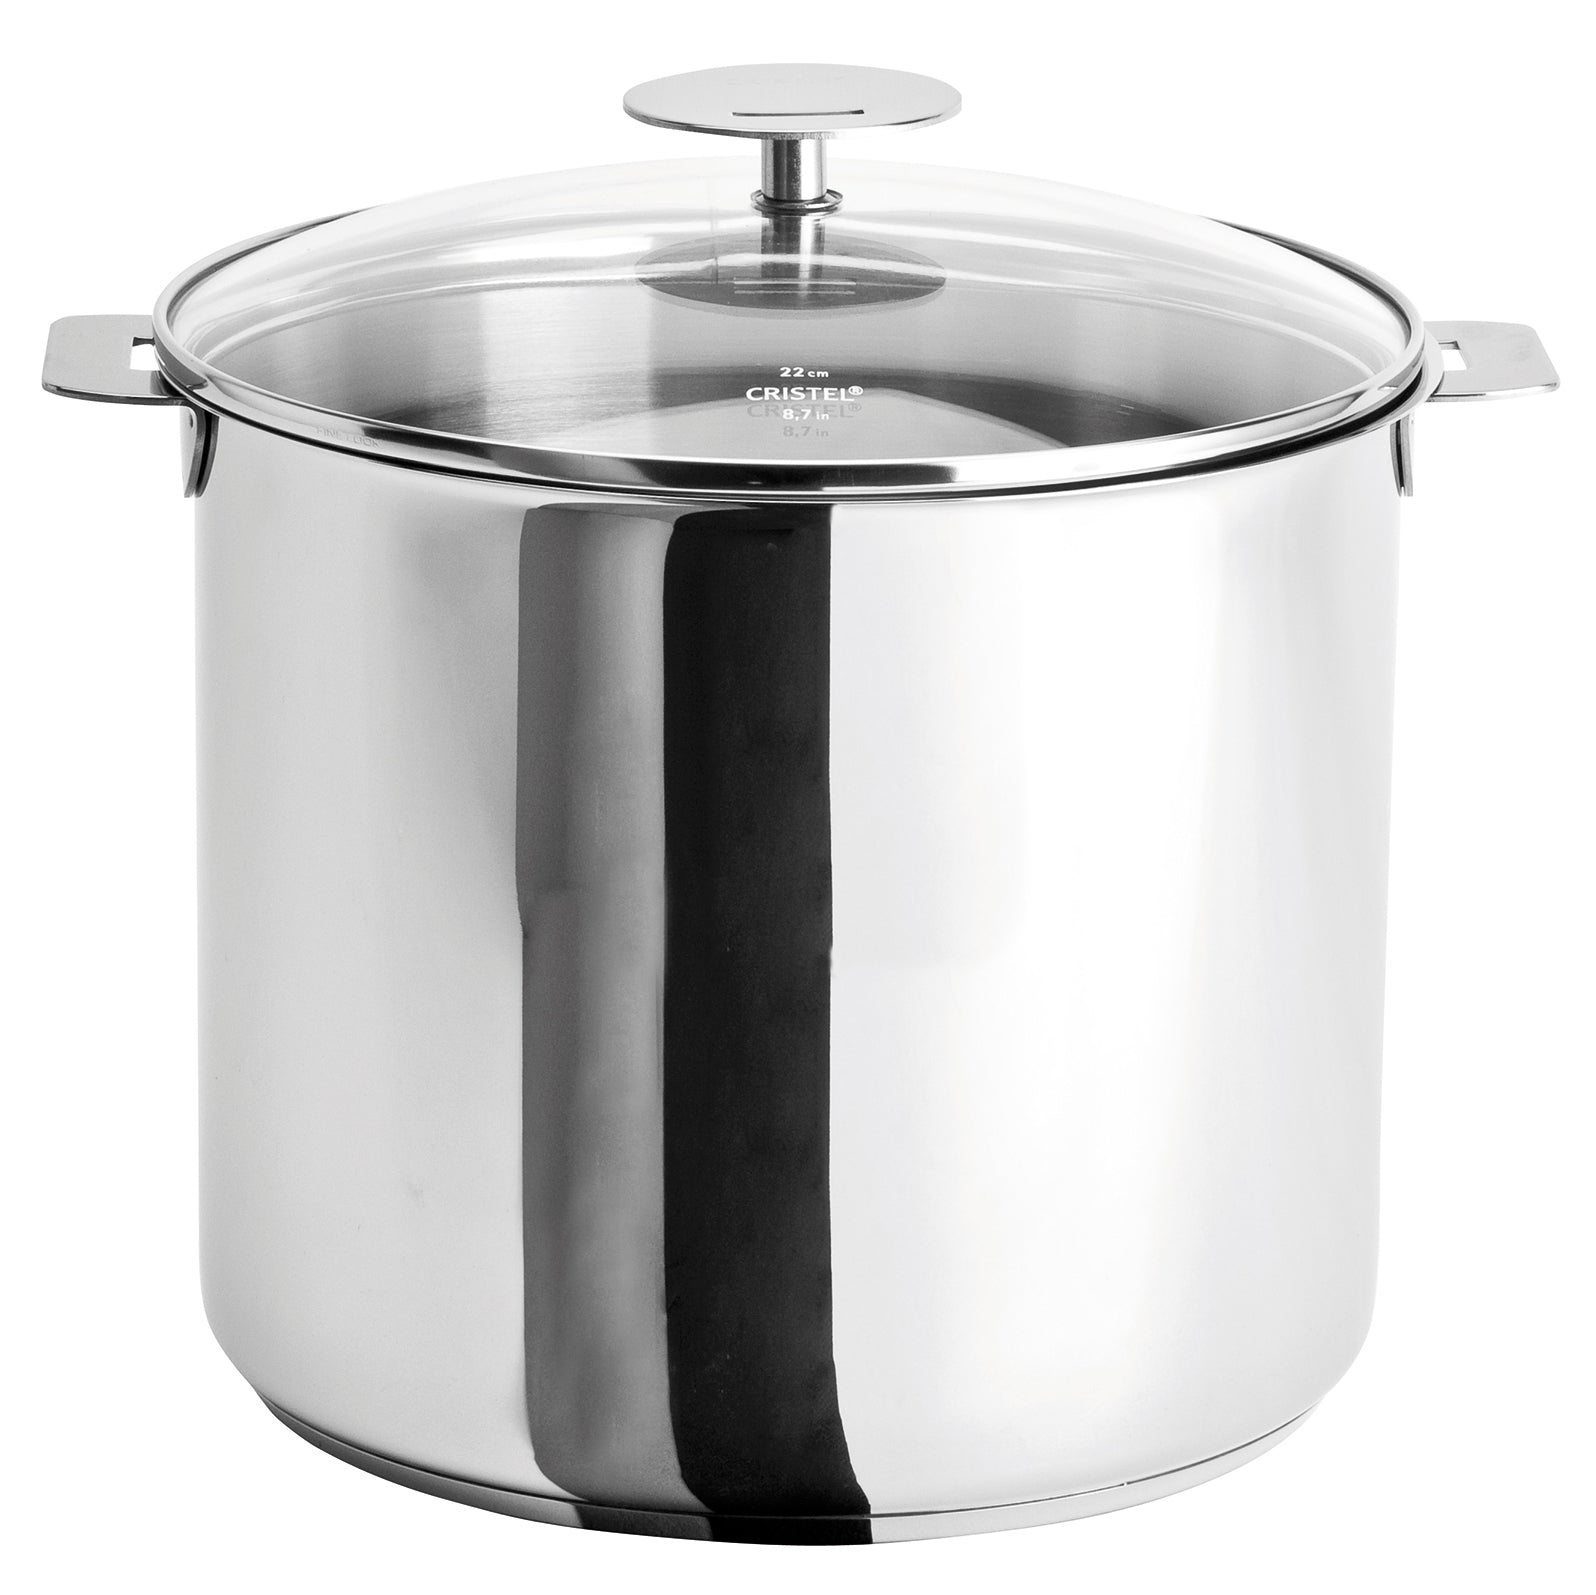 Ecolution Pure Intentions Stockpot, with Tempered Glass Lid, 8 Quarts, Stainless Steel